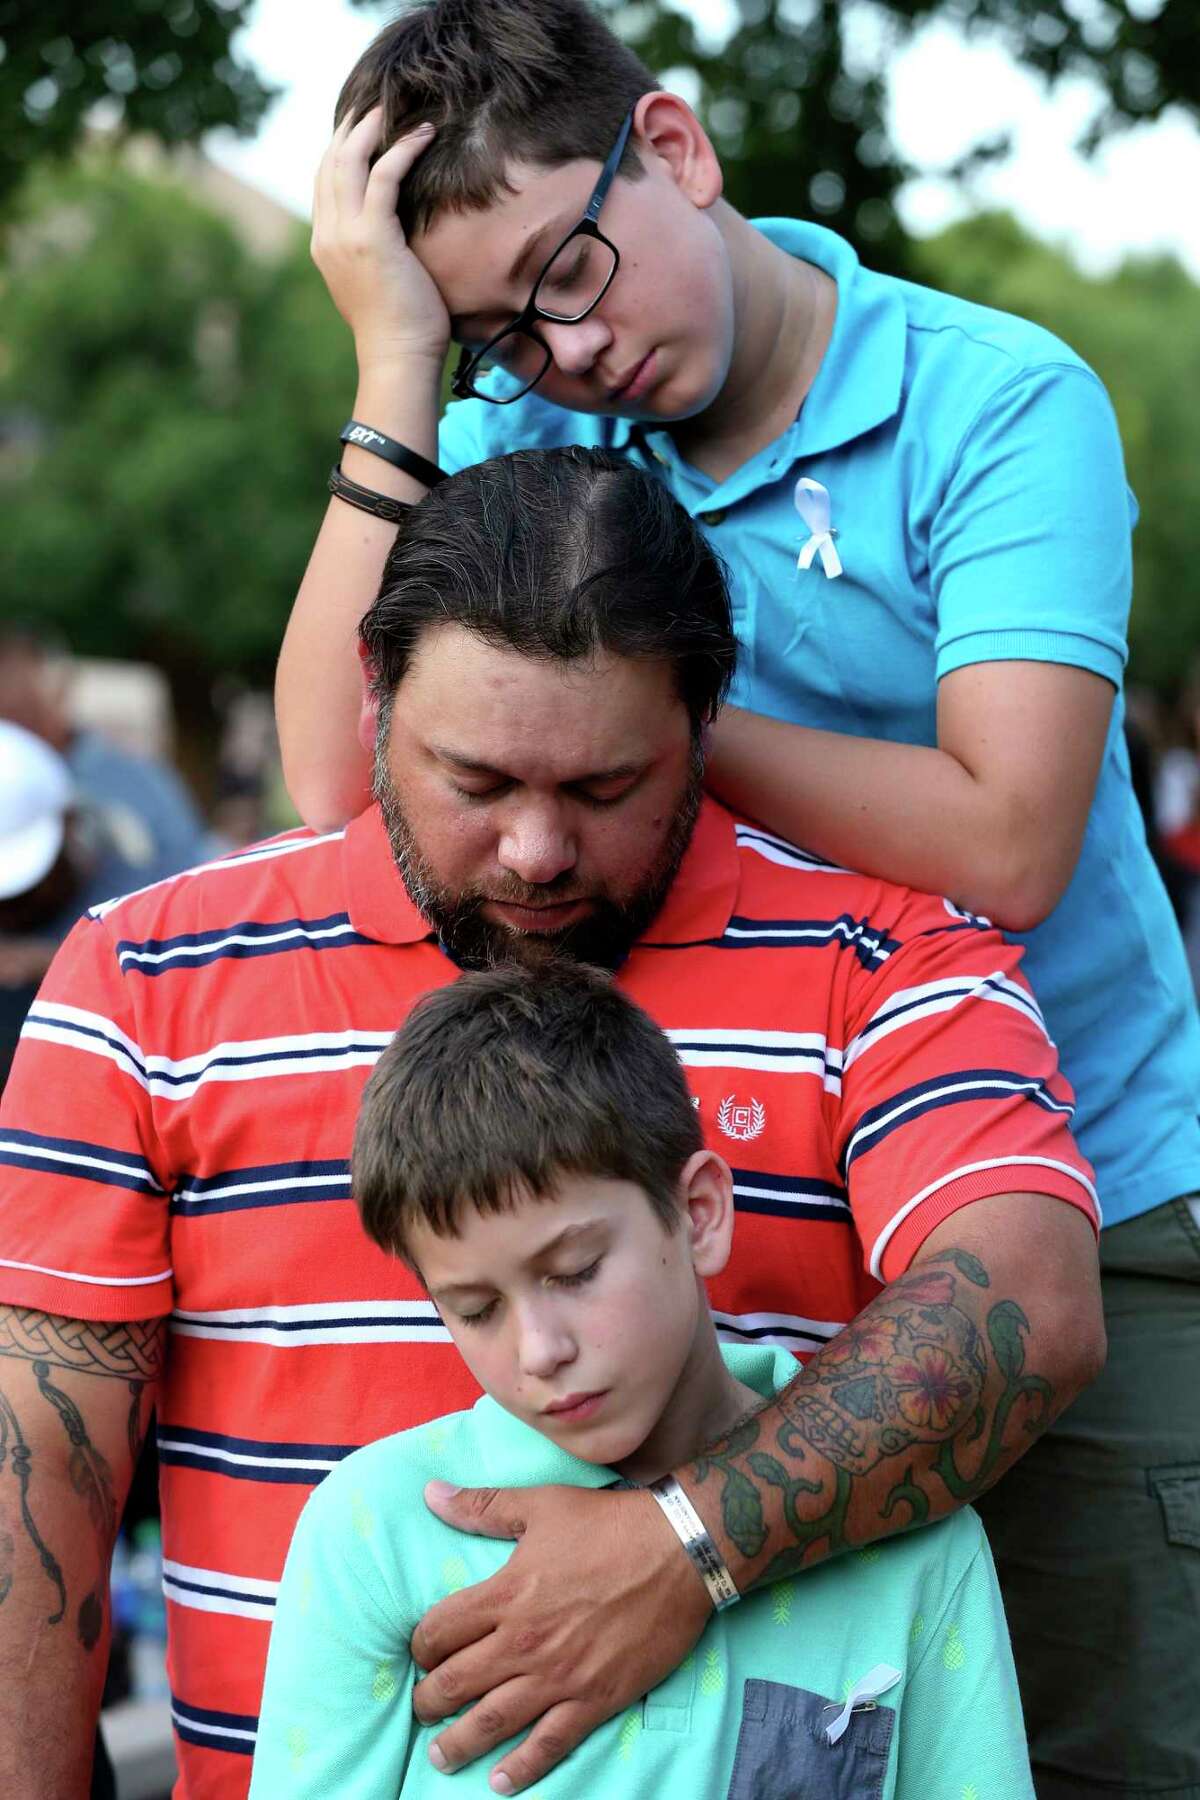 Michael Pules prays with his sons, Luke, 13, top, and Liam, 11, during a vigil at the University of Texas of the Permian Basin in Odessa, Texas on Sunday, Sept. 1, 2019. The vigil was for the victims of Saturday's mass shooting. Seth Aaron Ator, 36, of Odessa, is suspected of killing seven people an injuring 19 in a shooting spree on Saturday.